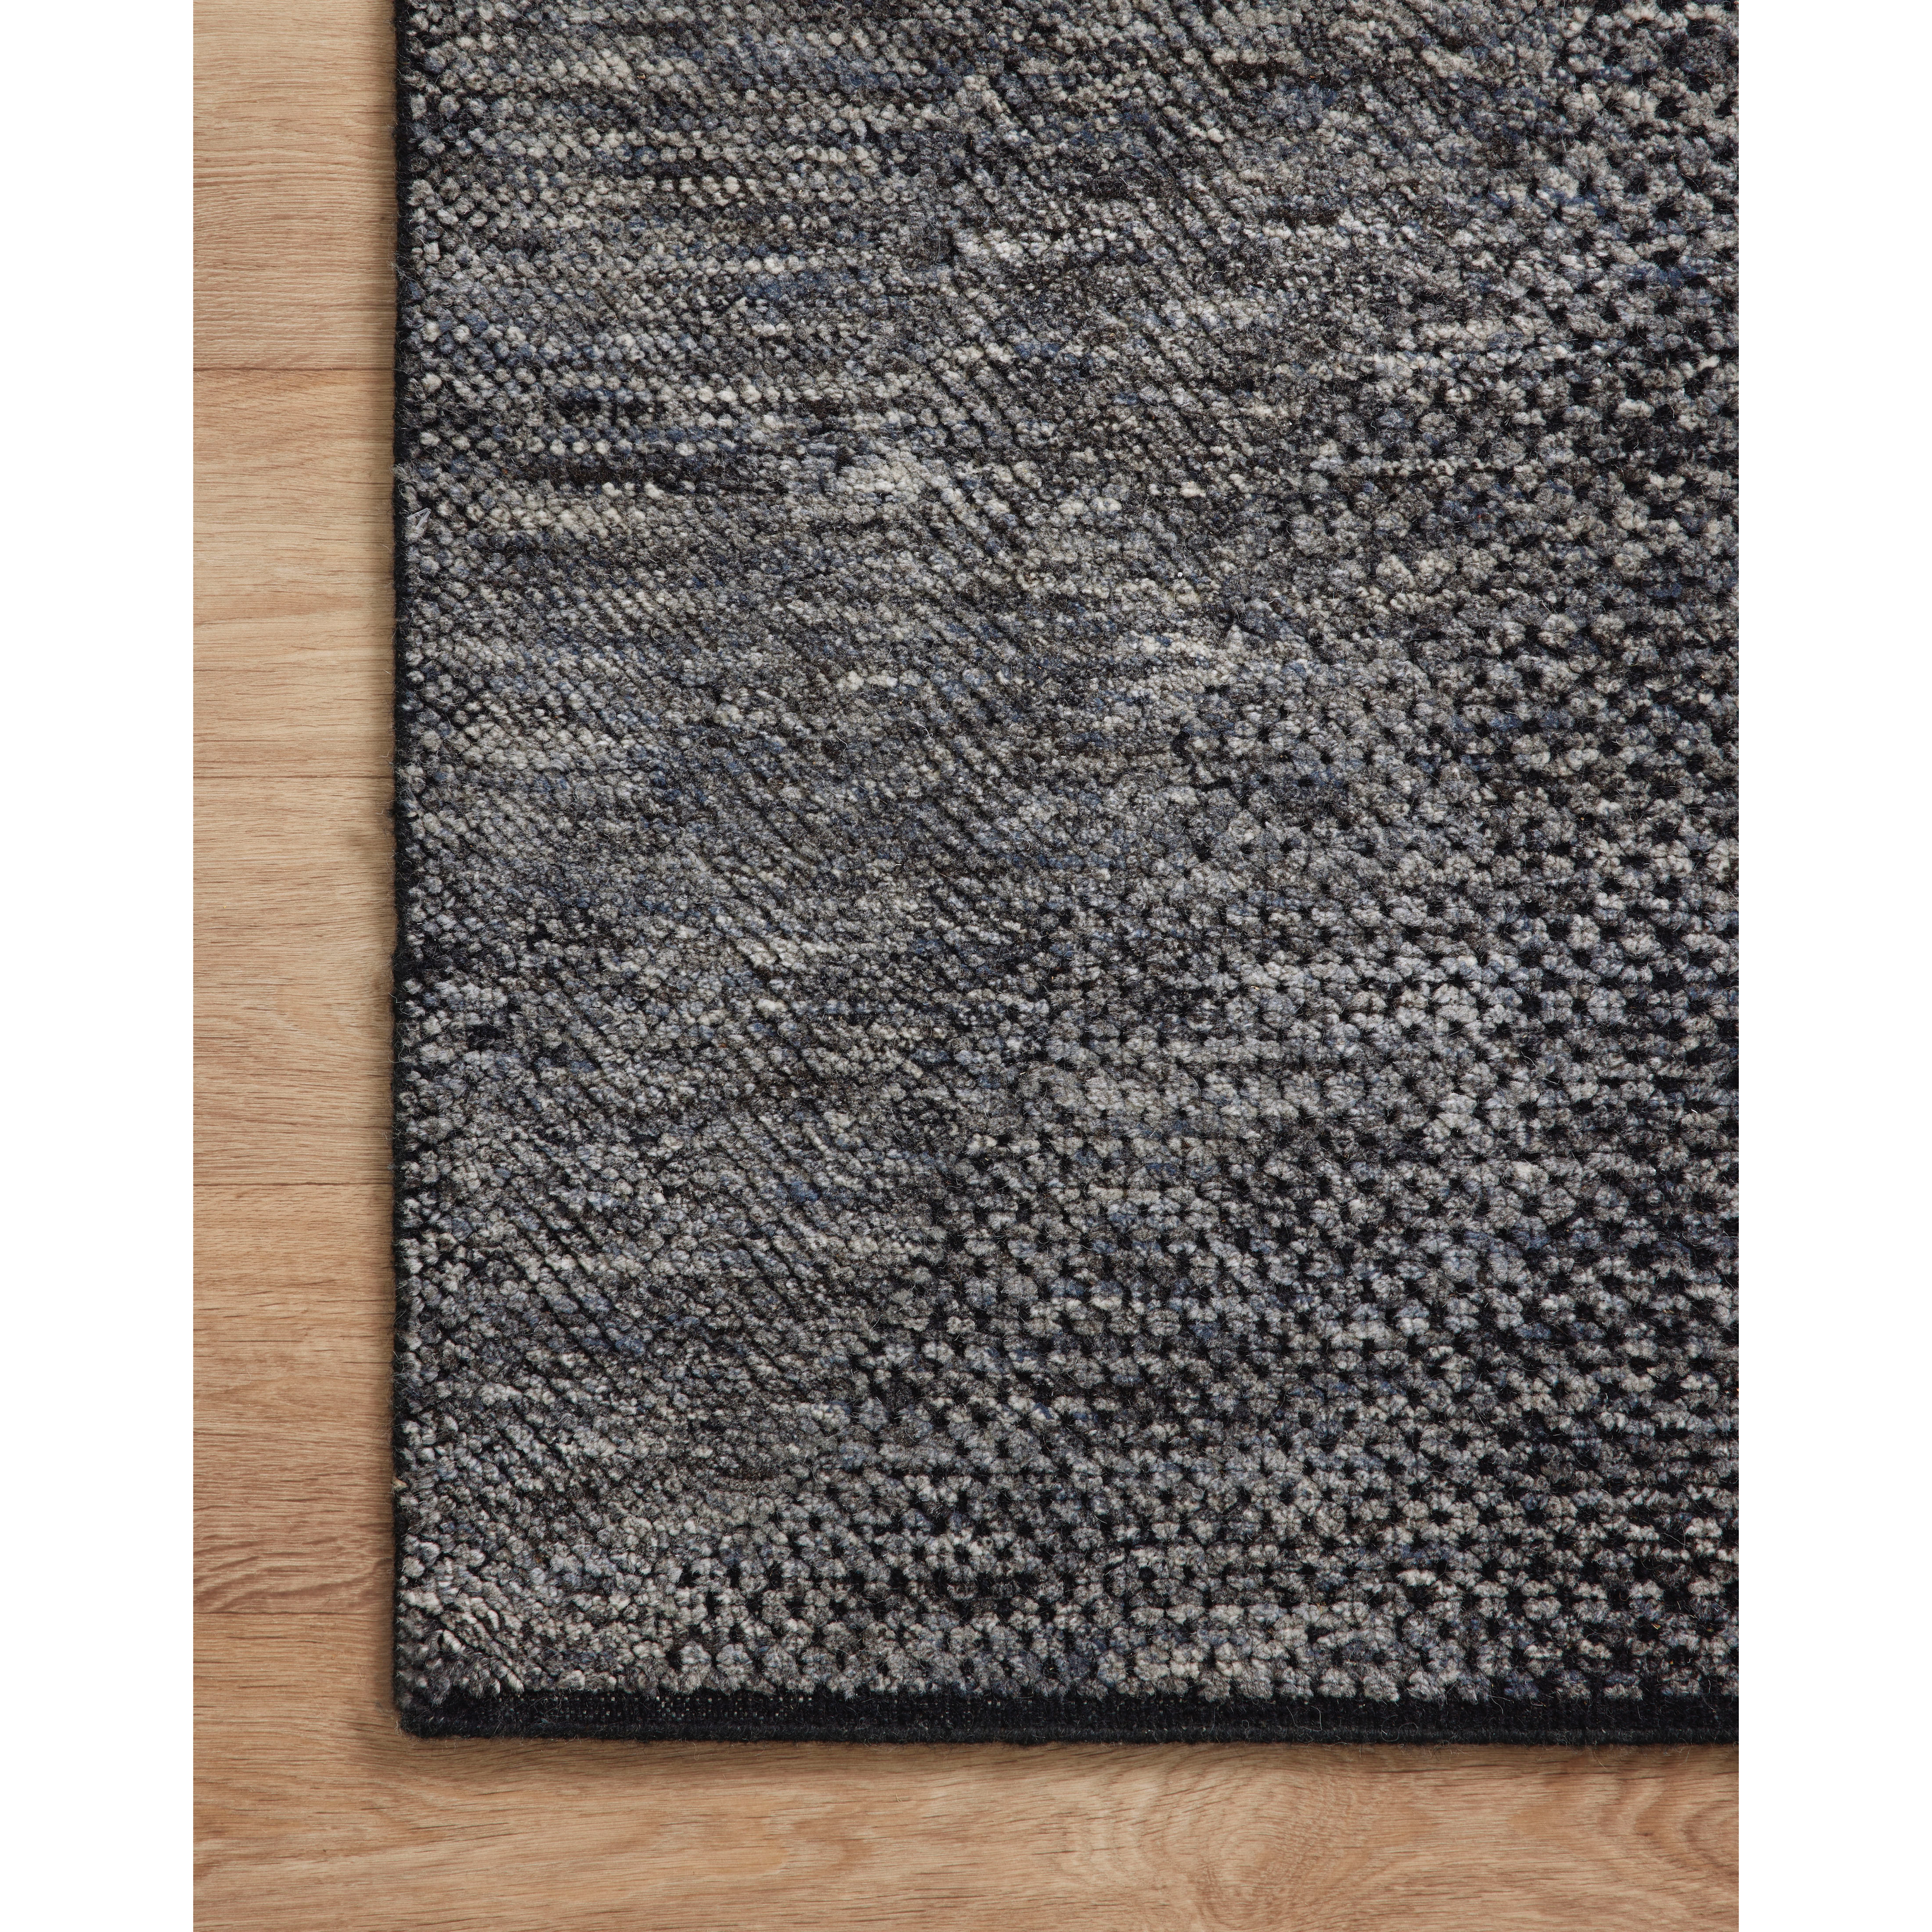 The Collins Amber Lewis x Loloi COI-01 AL Charcoal / Denim rug for Amber Lewis x Loloi is hand-knotted of wool and cotton by skilled artisans in India and GoodWeave-Certified. Collins features varying knotting techniques interwoven to create a uniquely texture pattern. Amethyst Home provides interior design, new construction, custom furniture, and rugs for the Winter Park and Orlando, Florida metro area.